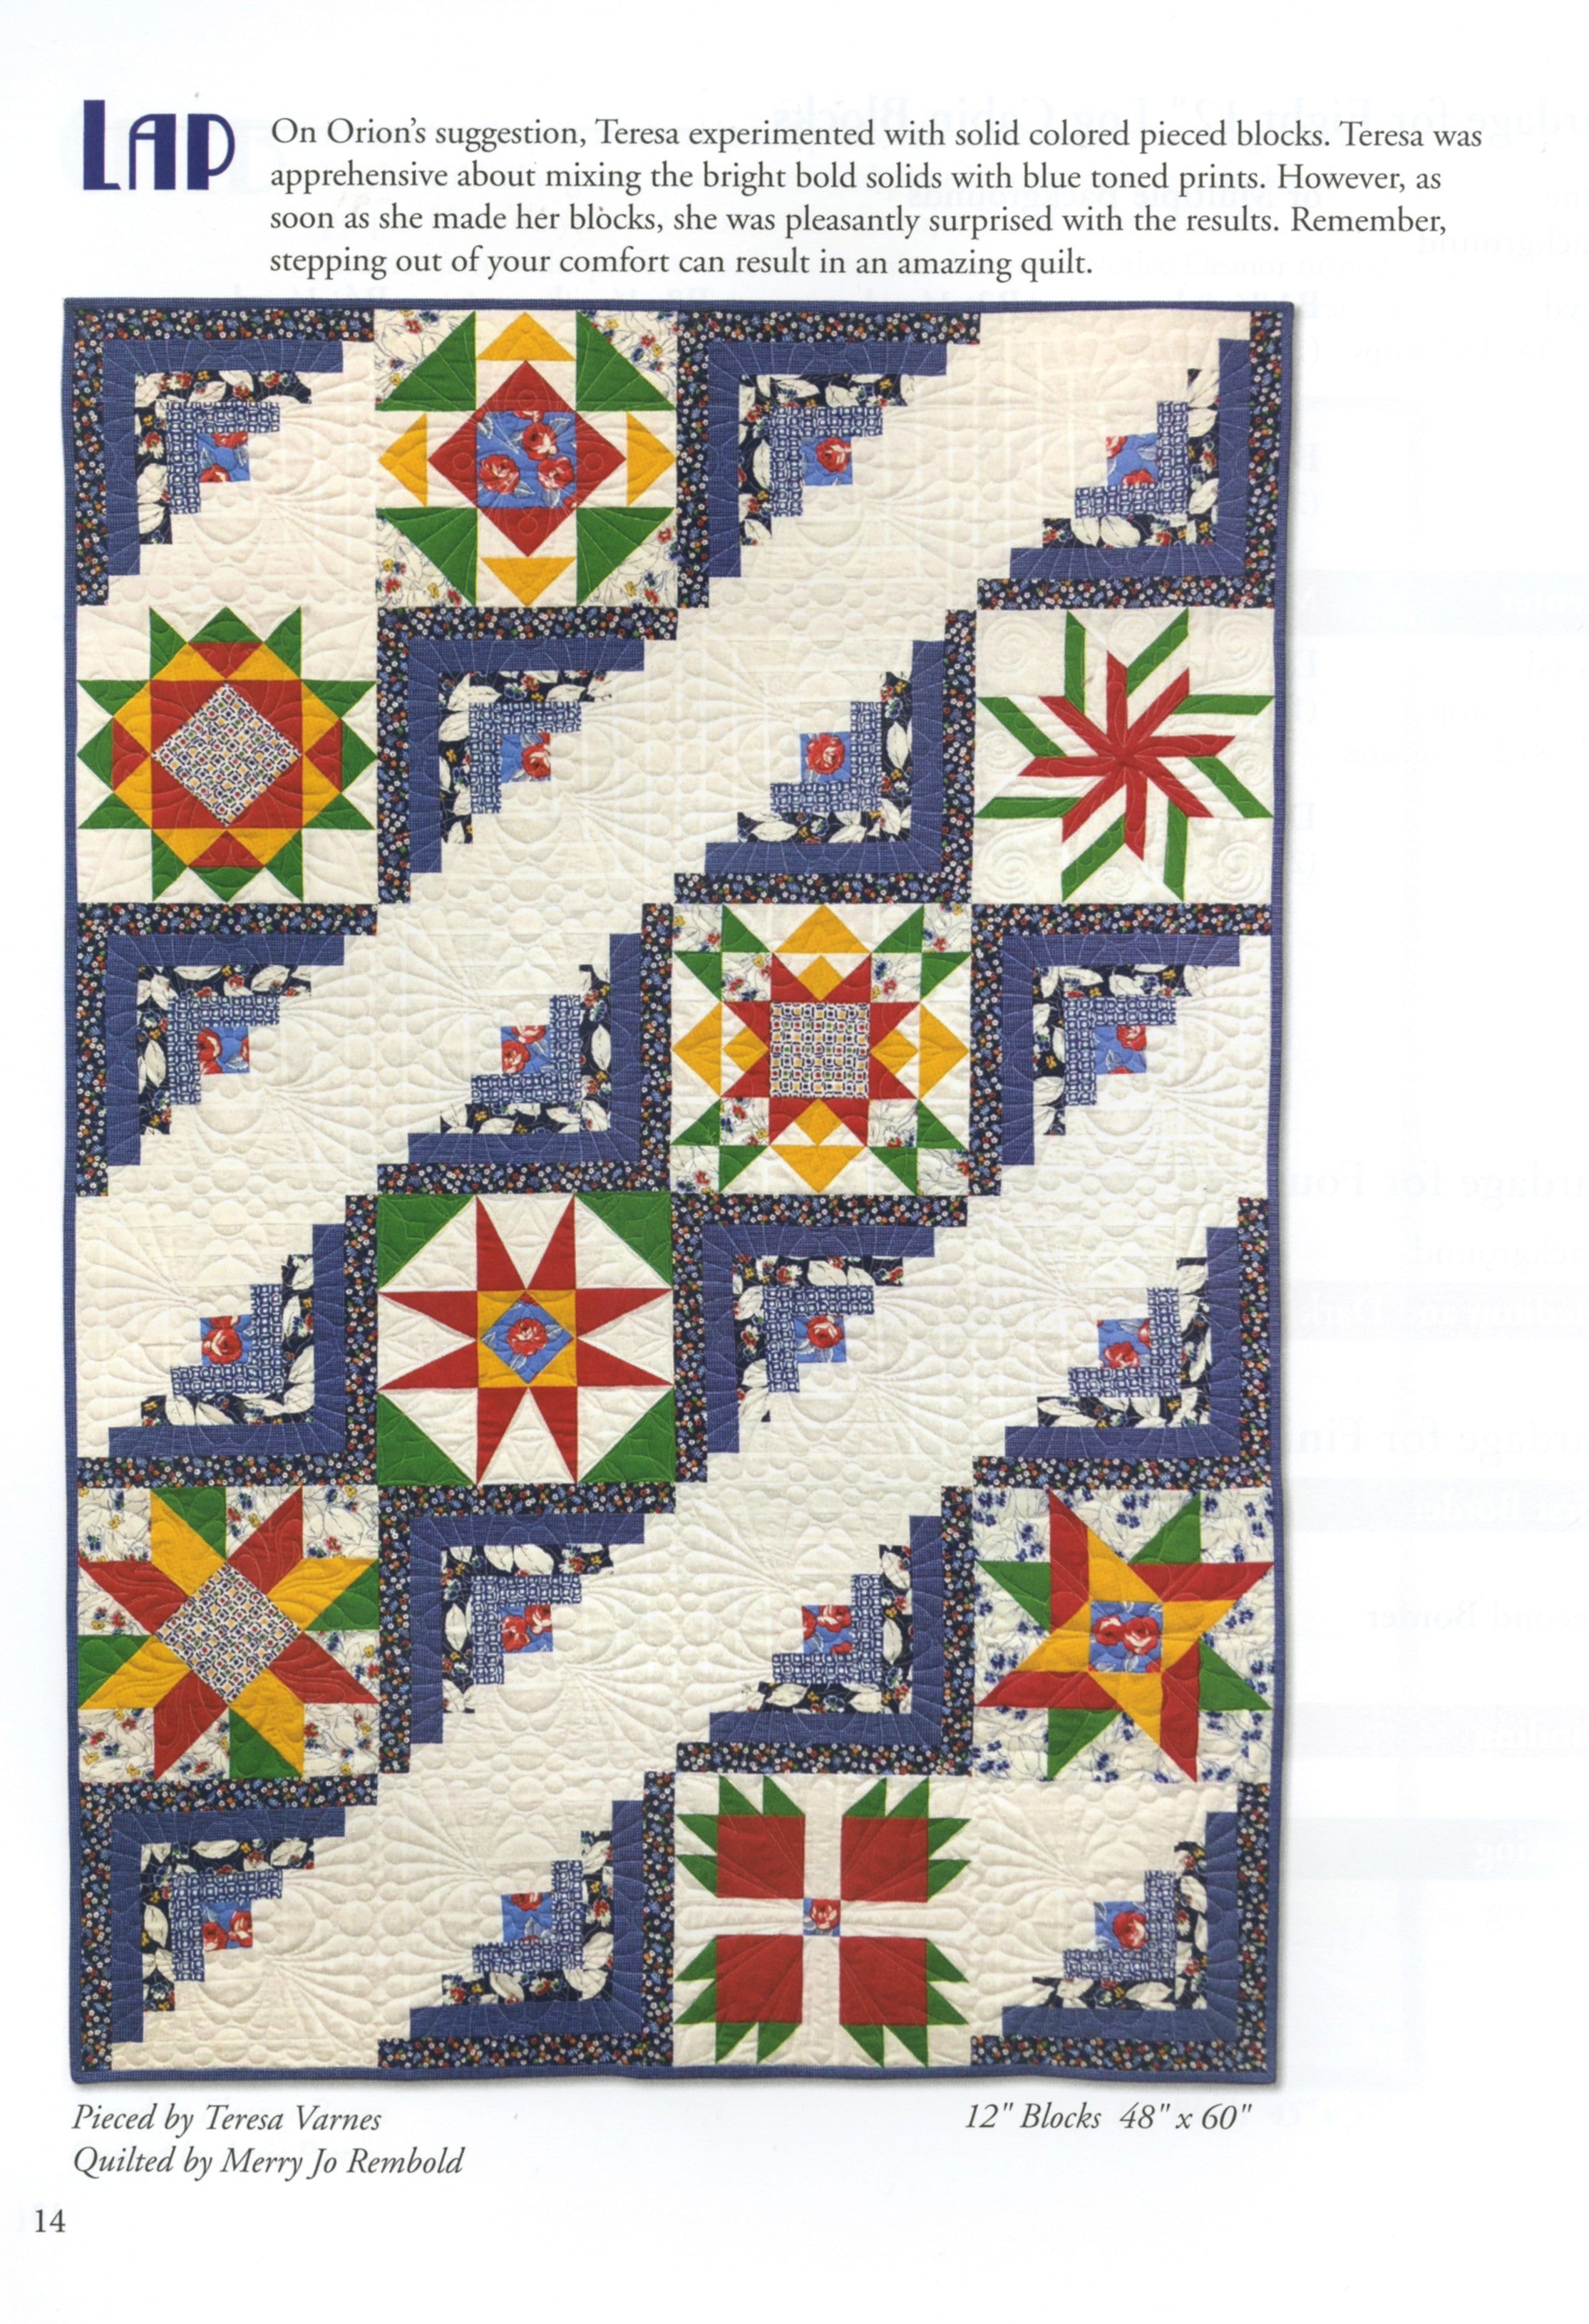 Forty Fabulous Years Quilt Pattern Book by Eleanor Burns for Quilt In A Day - Dings & Dents